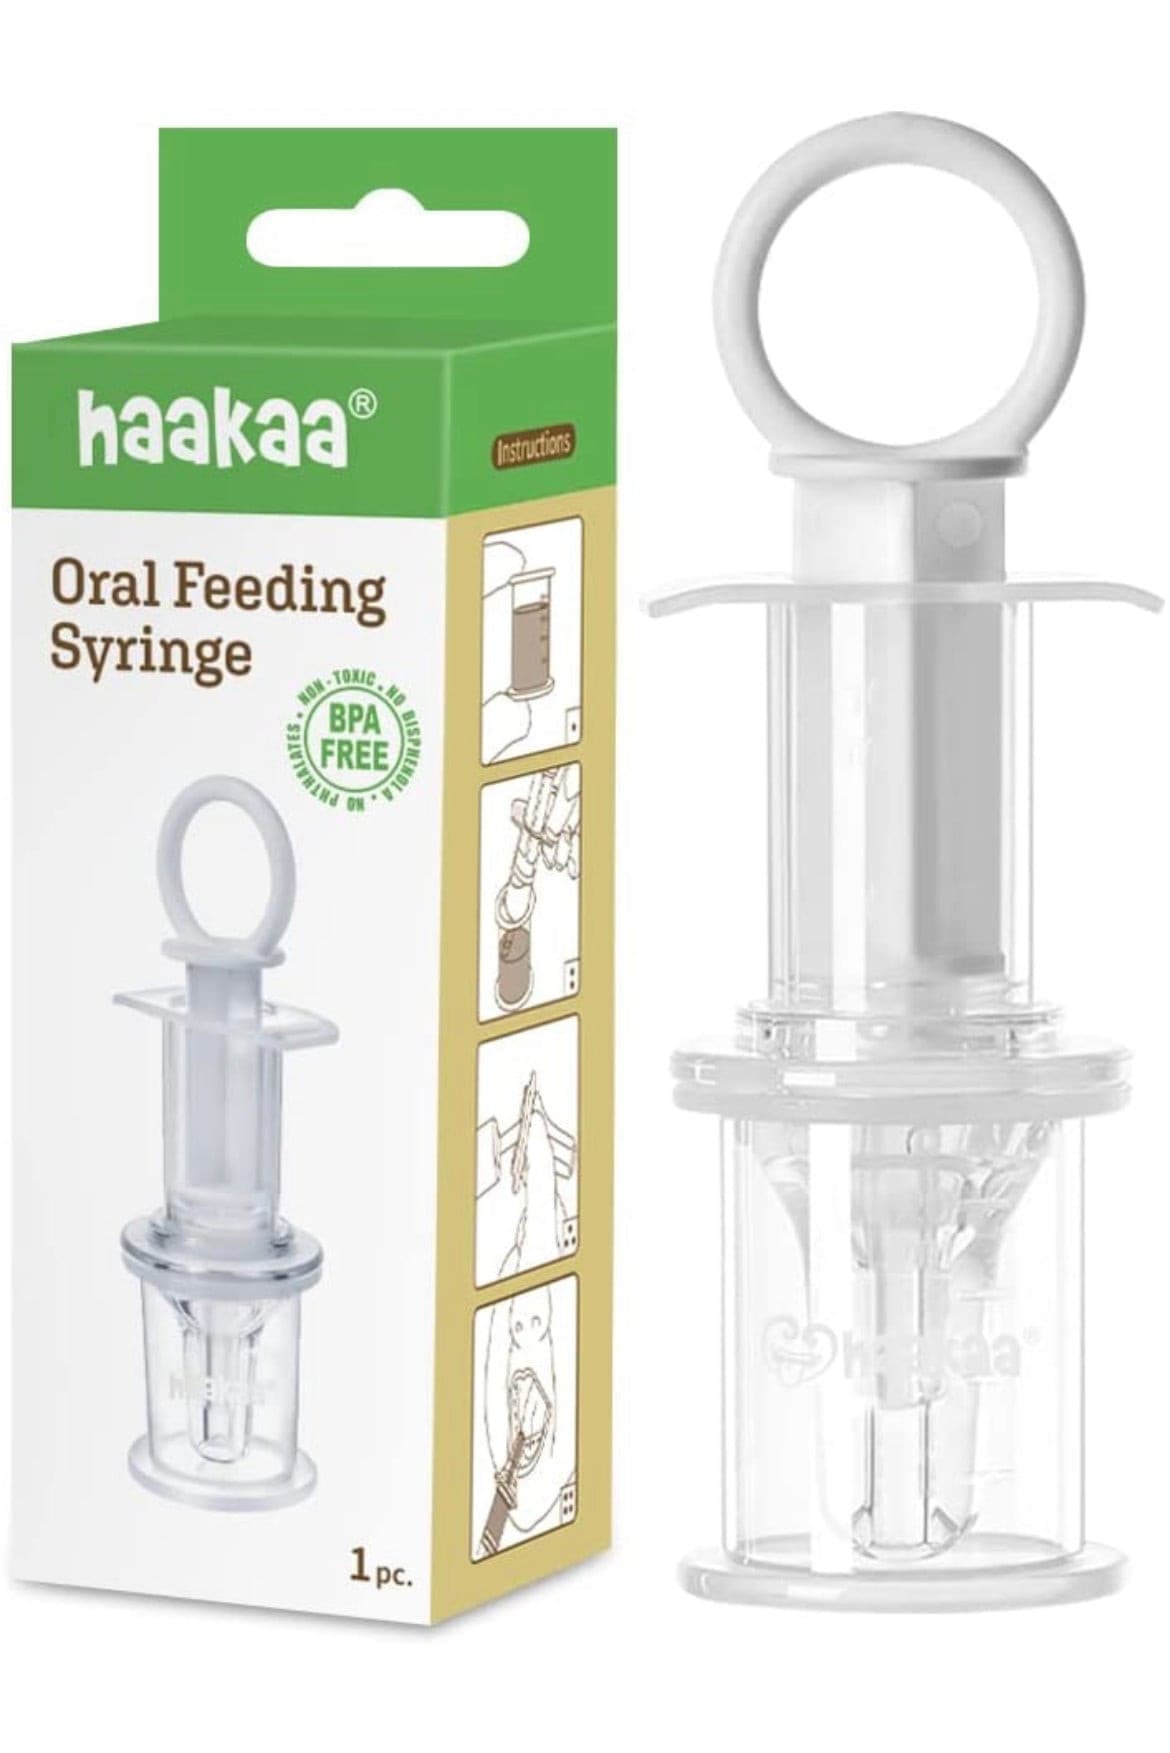 Baby Feeding Syringe with Pacifier Suitable for Infants Newborns by haakaa.